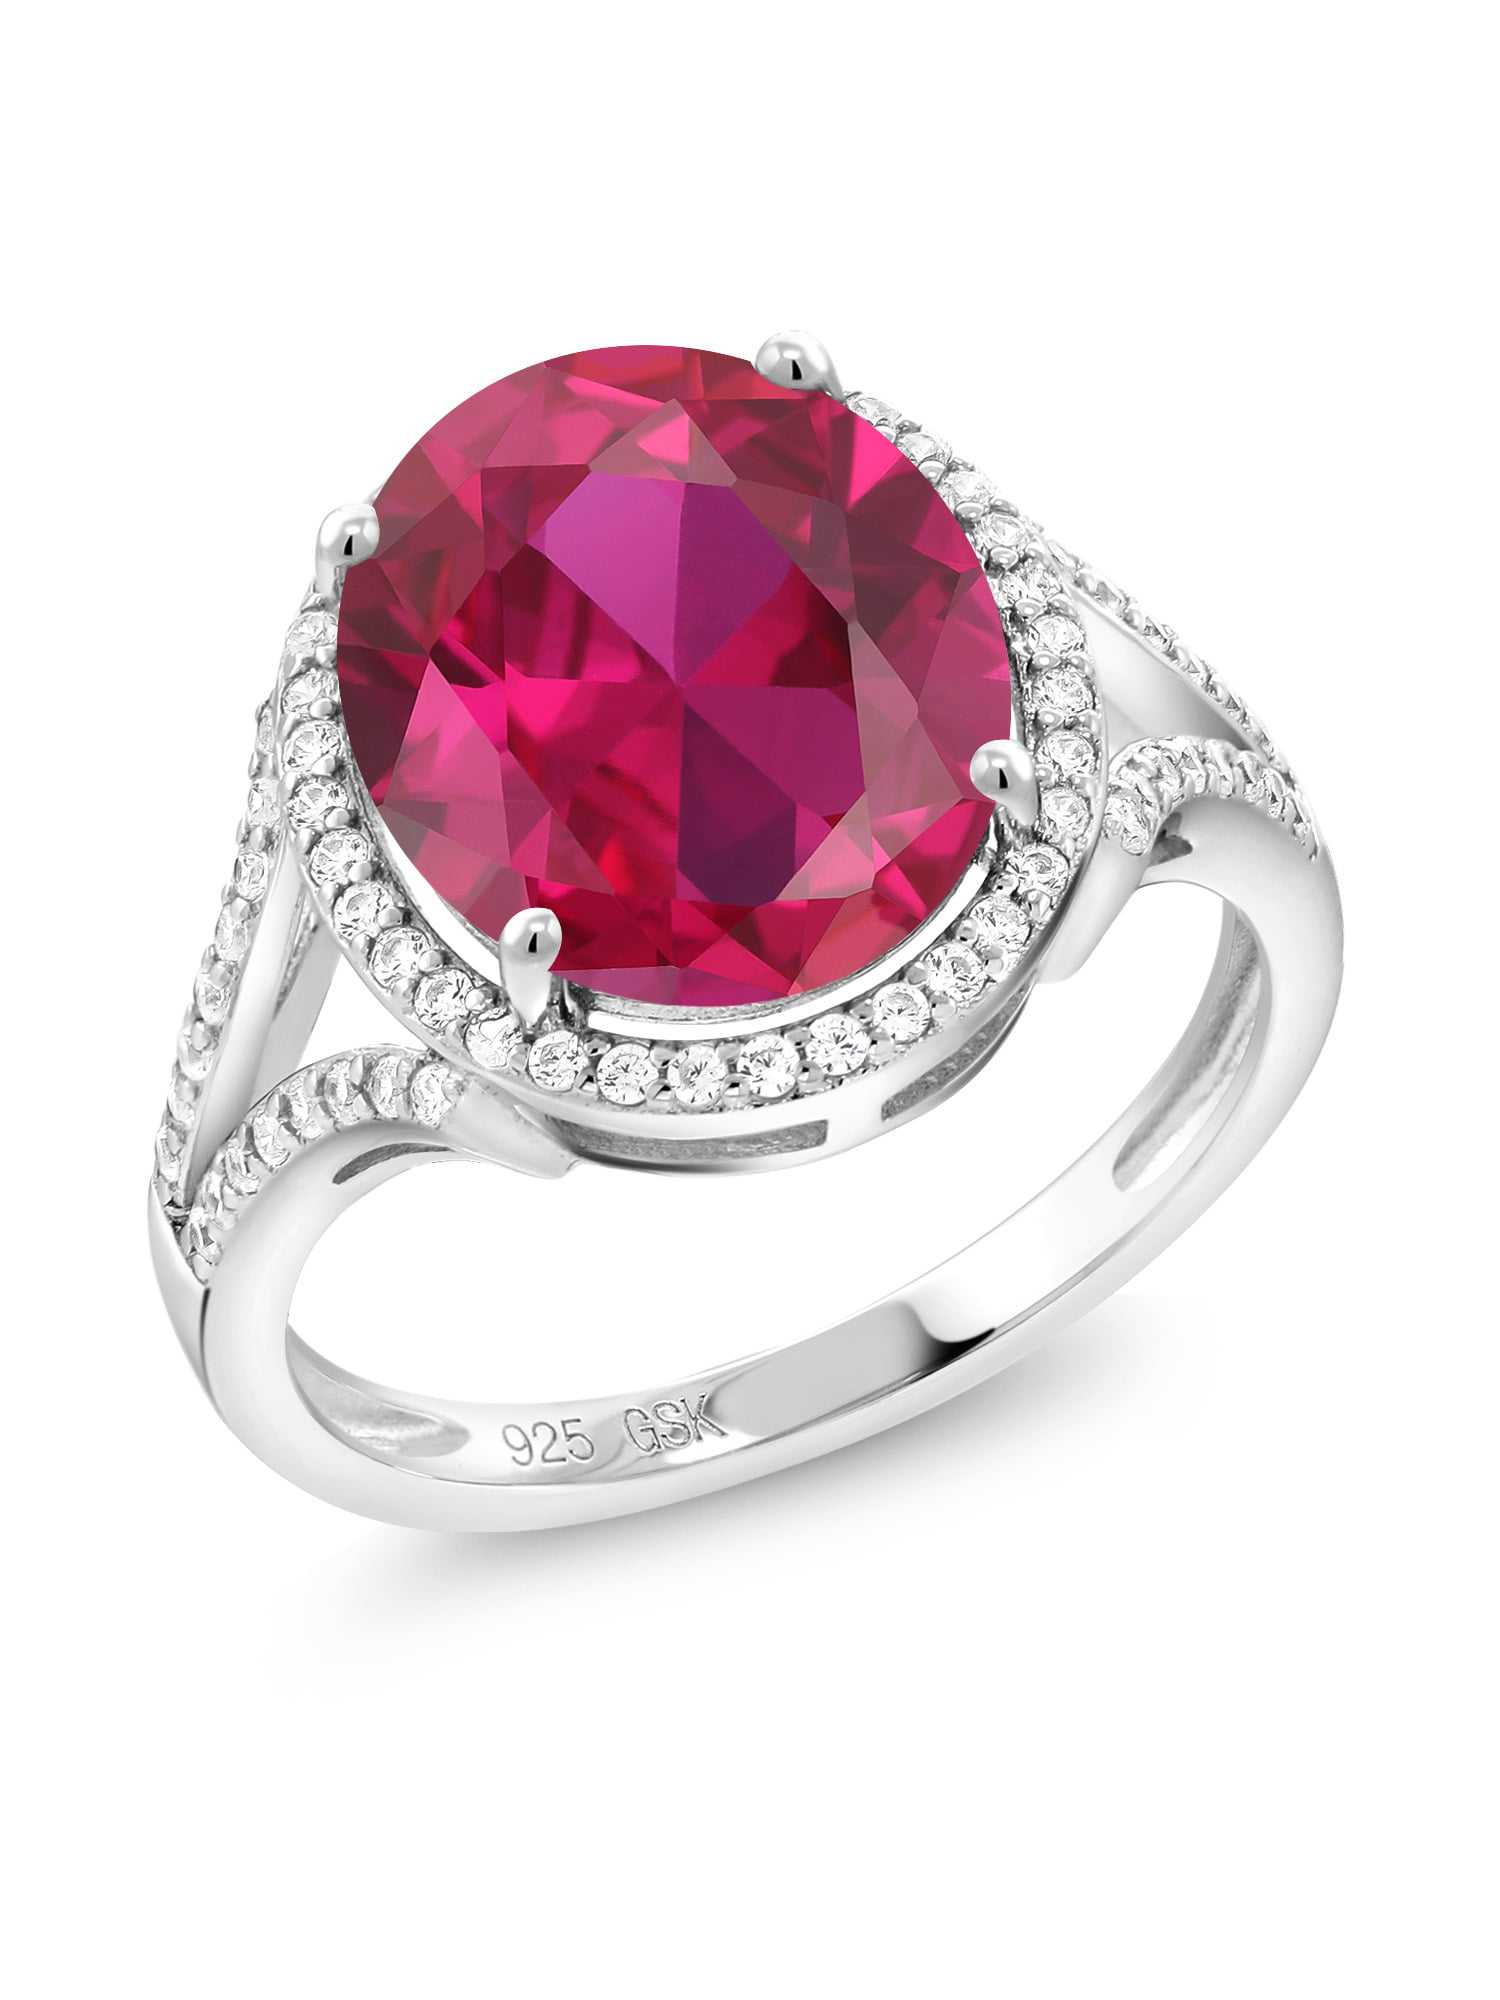 .925 Sterling Silver Oval Cut Ruby CZ Birthstone Promise Ring Size 5 6 7 8 NEW 